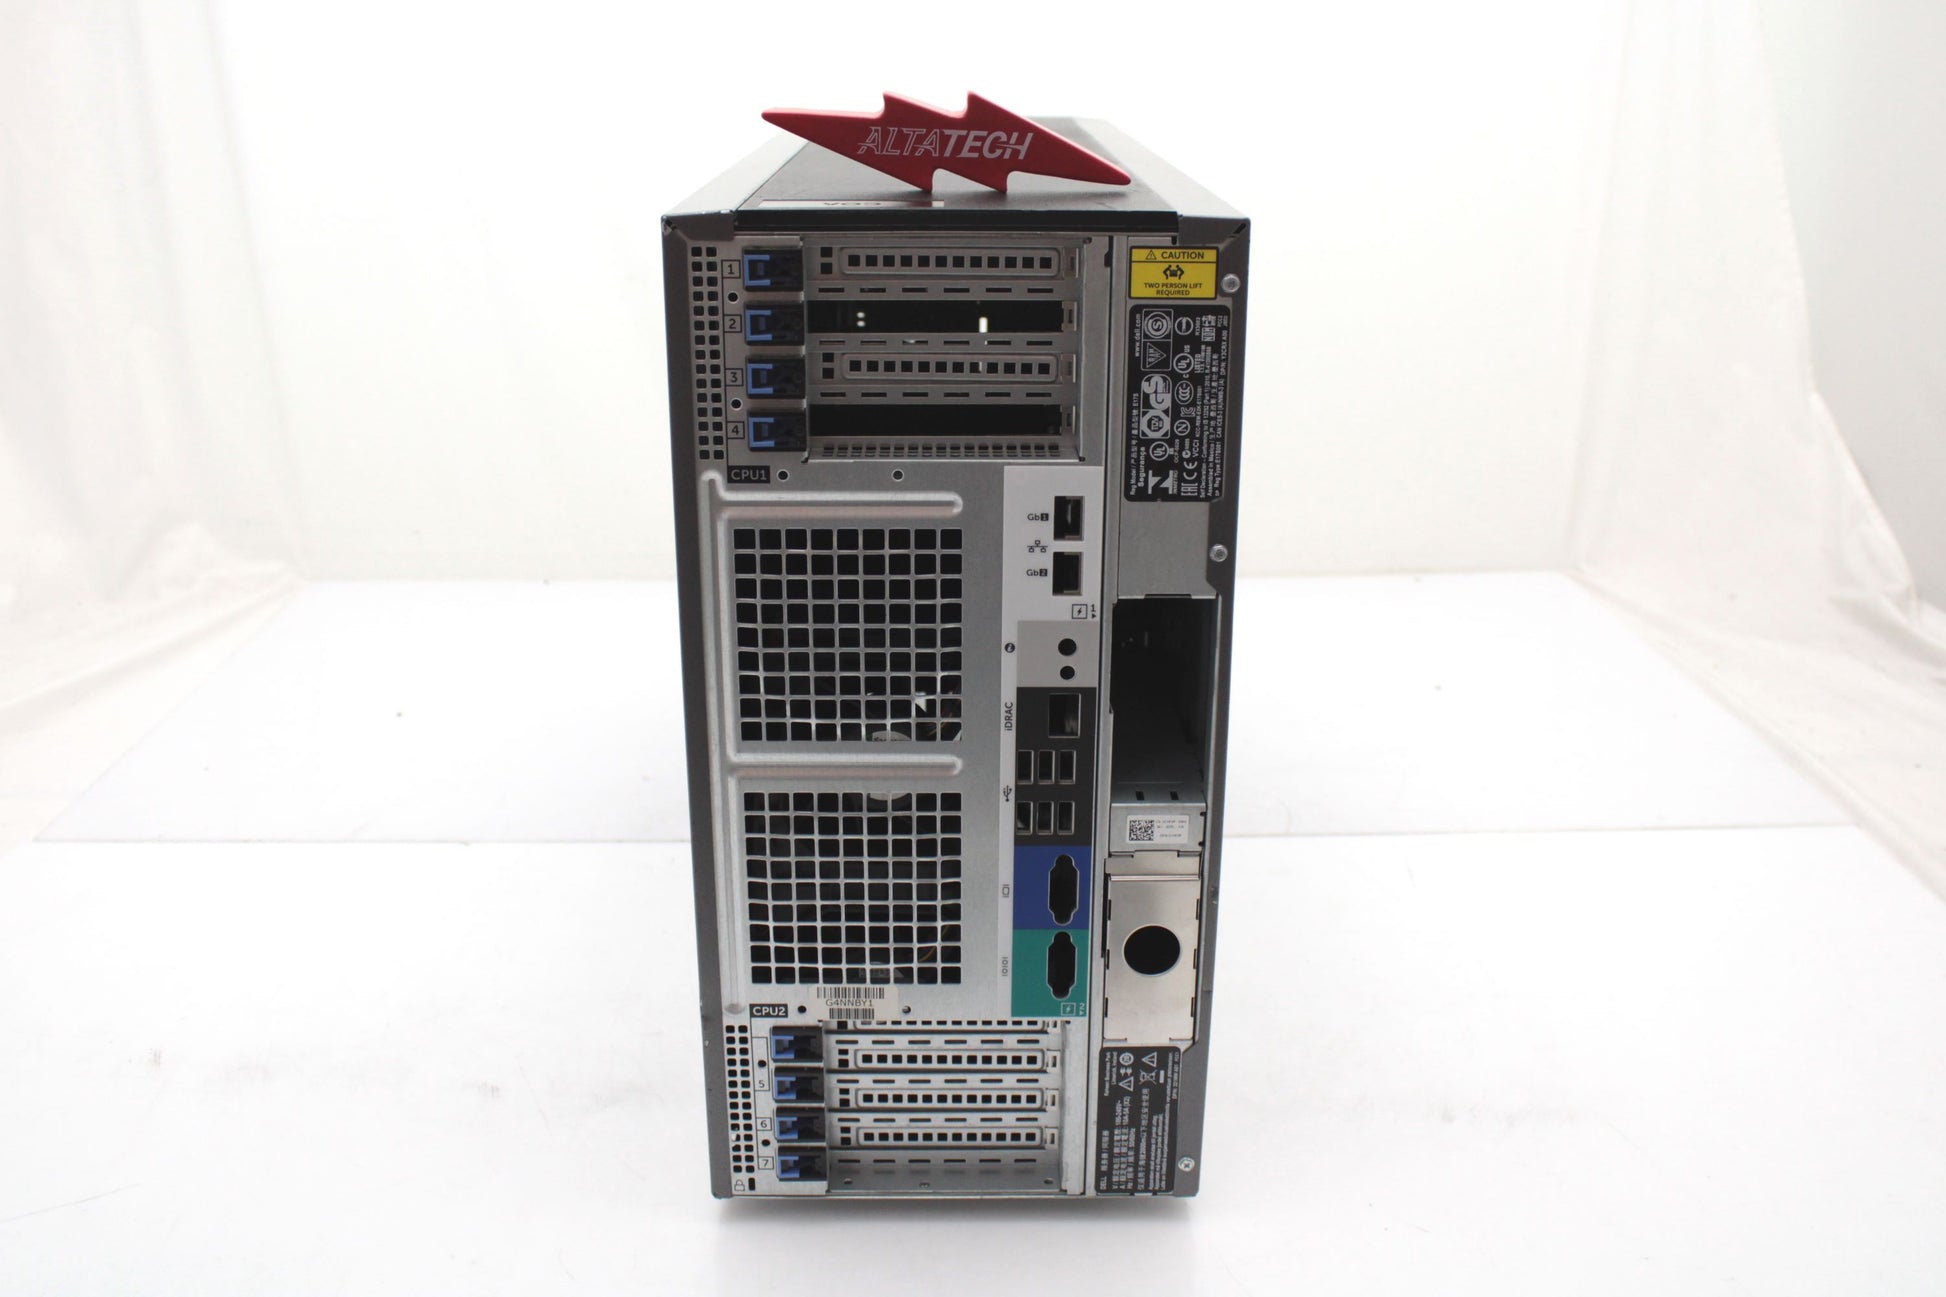 Dell PET620 PowerEdge T620 Tower Server CTO, Used